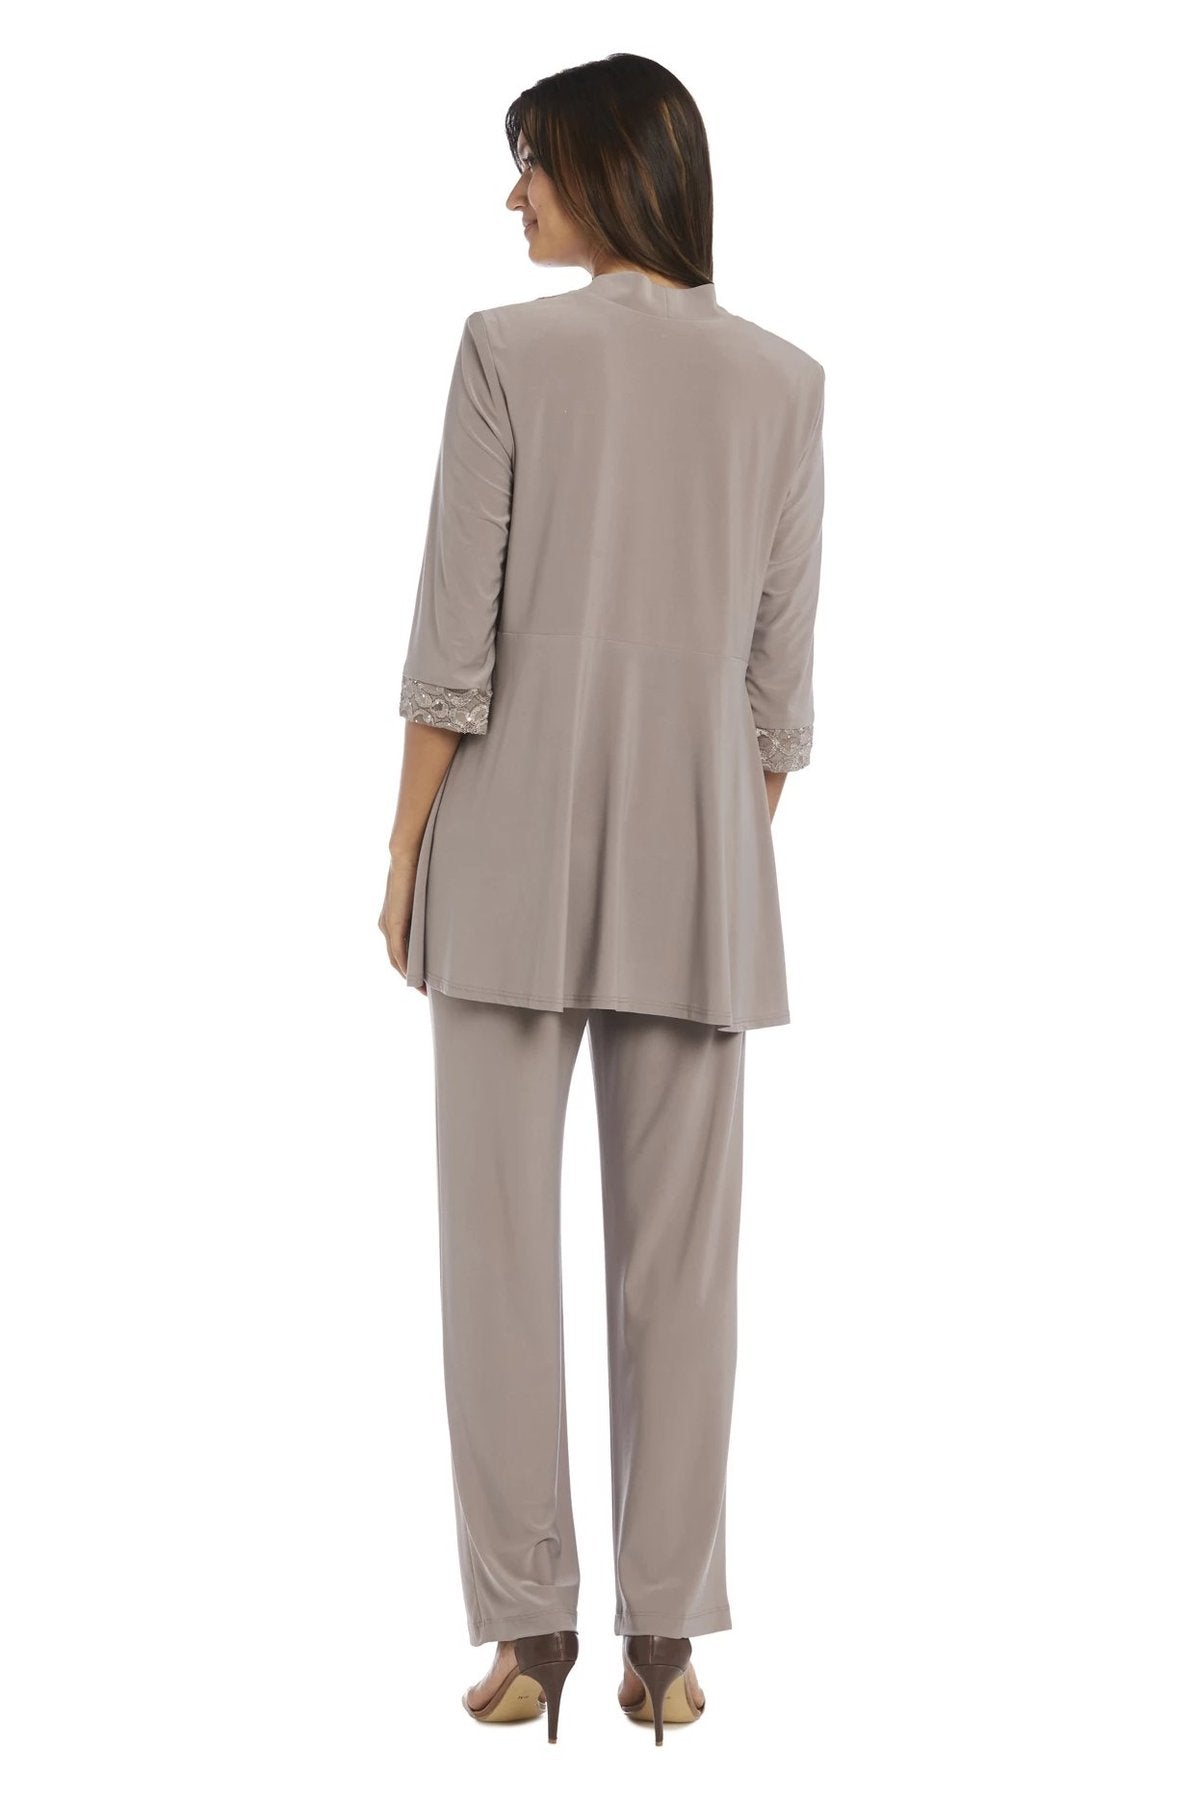 Womens Pant Suit for Wedding